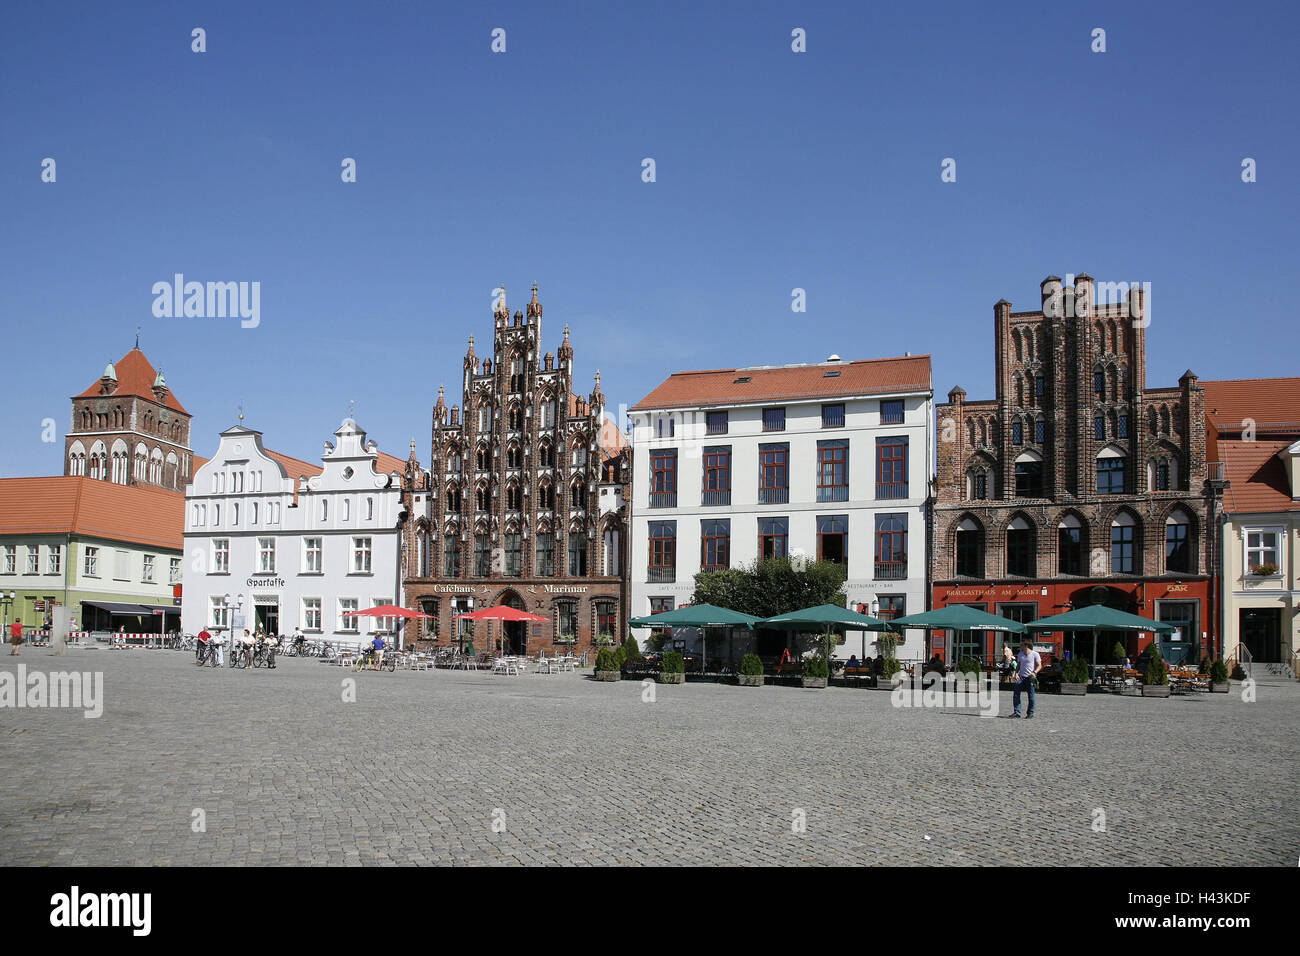 Germany, Mecklenburg-West Pomerania, Greifswald, marketplace, show facades, St. Marien church, town, Hanseatic town, town view, city centre, houses, buildings, architecture, cafes, brick Gothic, North German, facades, terrace, differently, tourism, touris Stock Photo